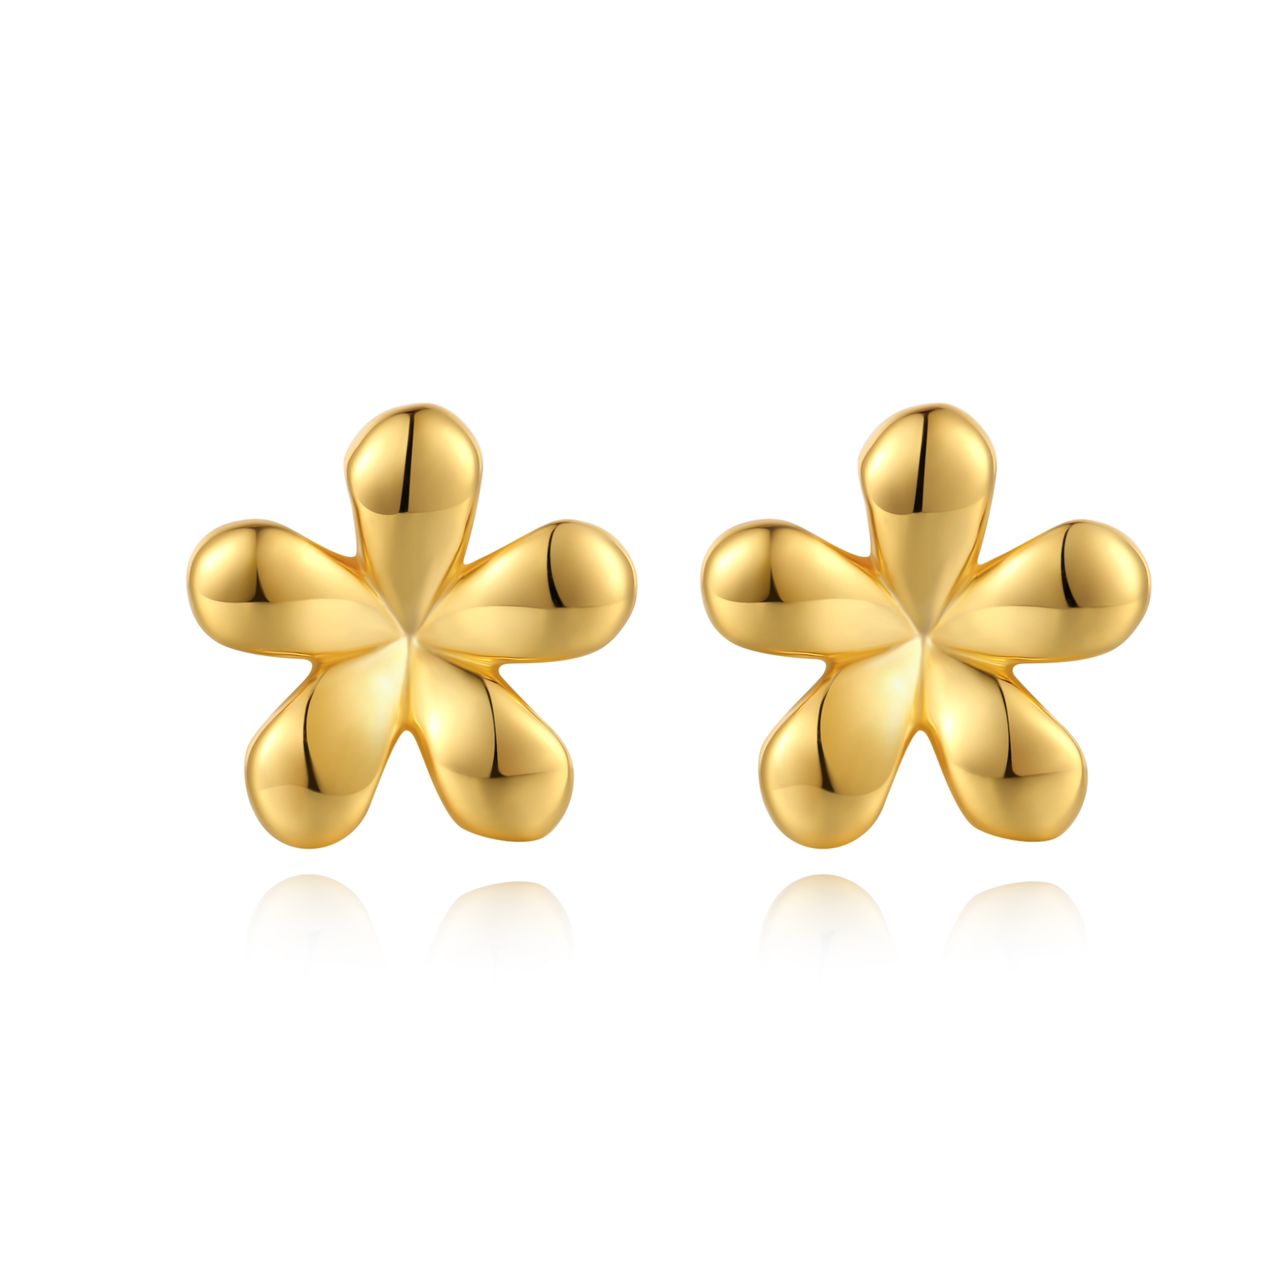 Blossom Earrings in Sterling Silver - Gold Plated